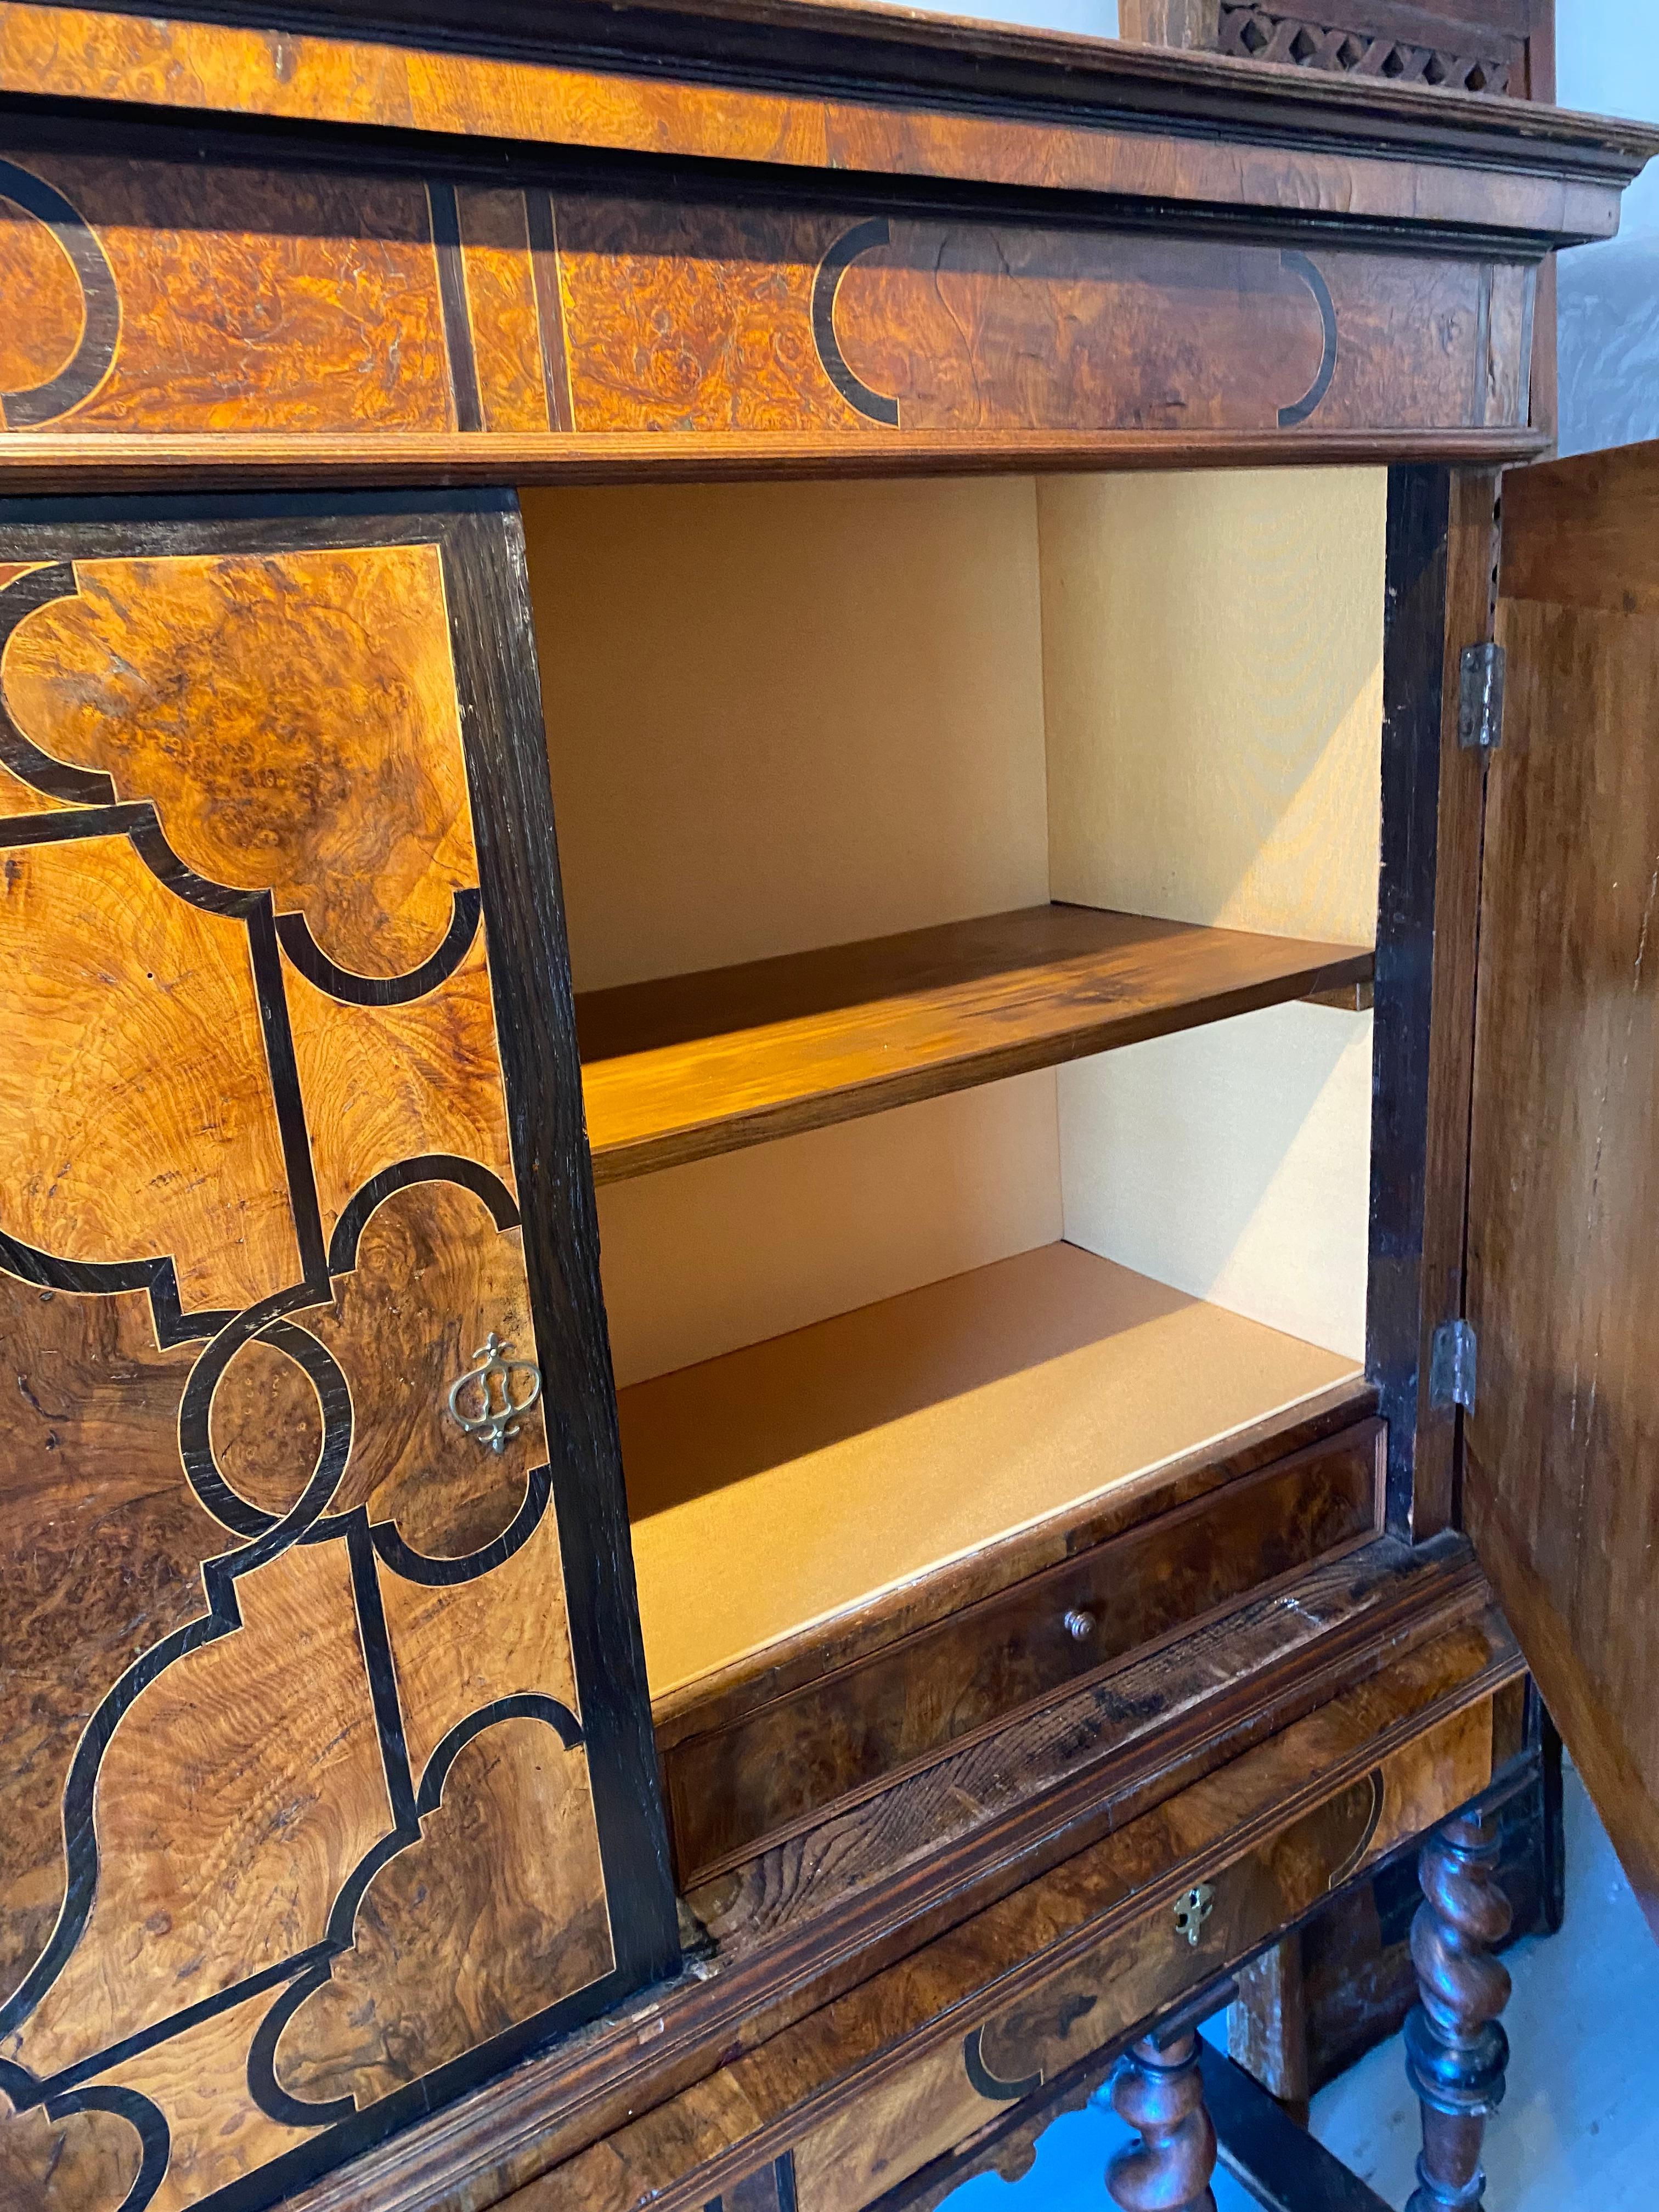 Made of walnut and burl walnut decorated with geometric inlay pattern ,it open with two leaves and two drawers in the front resting on twisted turned wooden legs joined by a spacer . Inside is covered with fabric and there is also two drawers.With a